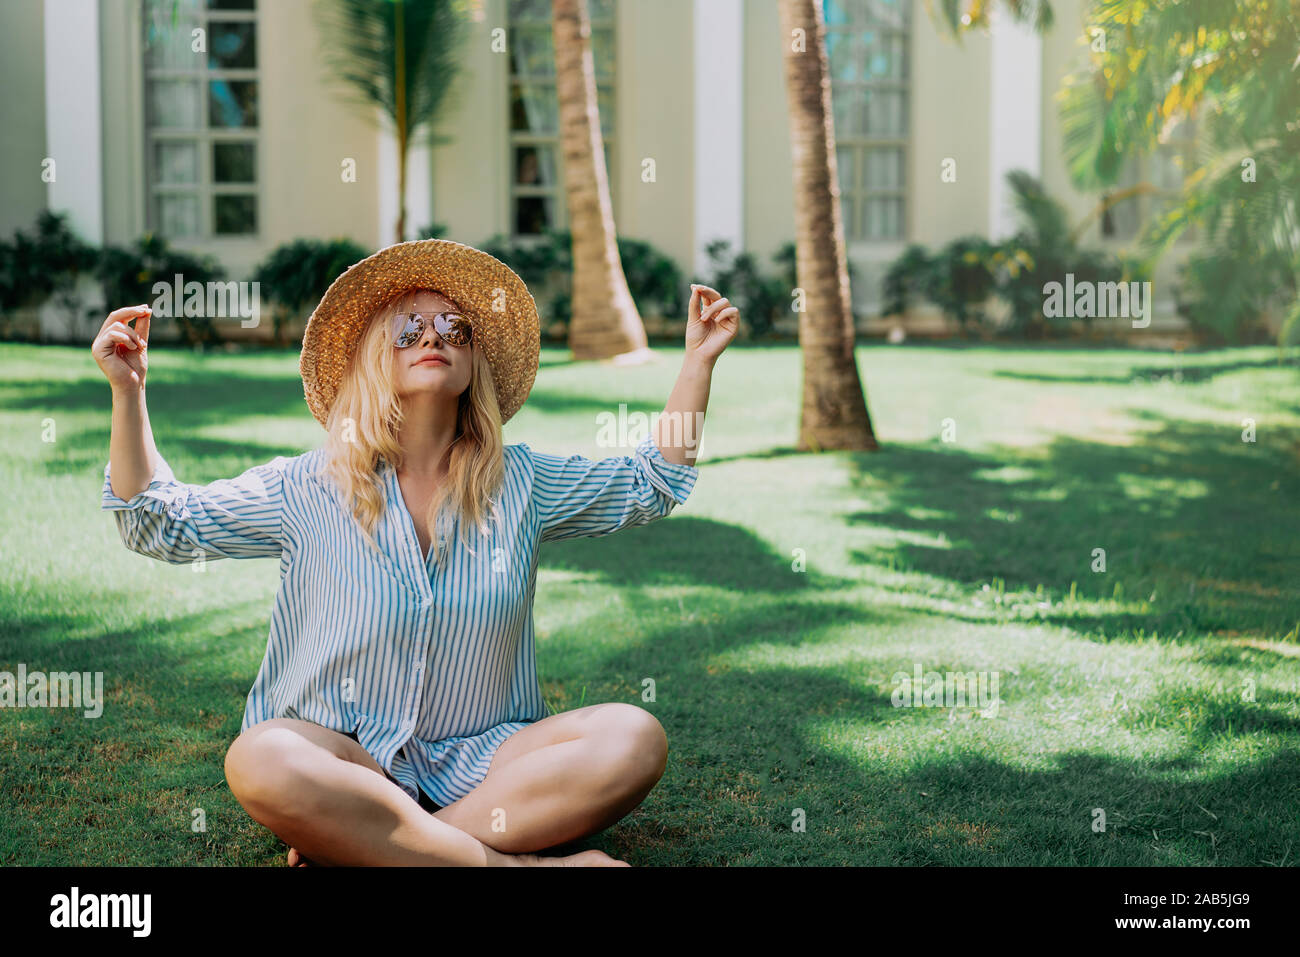 Portrait of beautiful of traveler woman with hat doing yoga behind palm trees. Sunlight. Concept travel, vacation, dream,sport Stock Photo